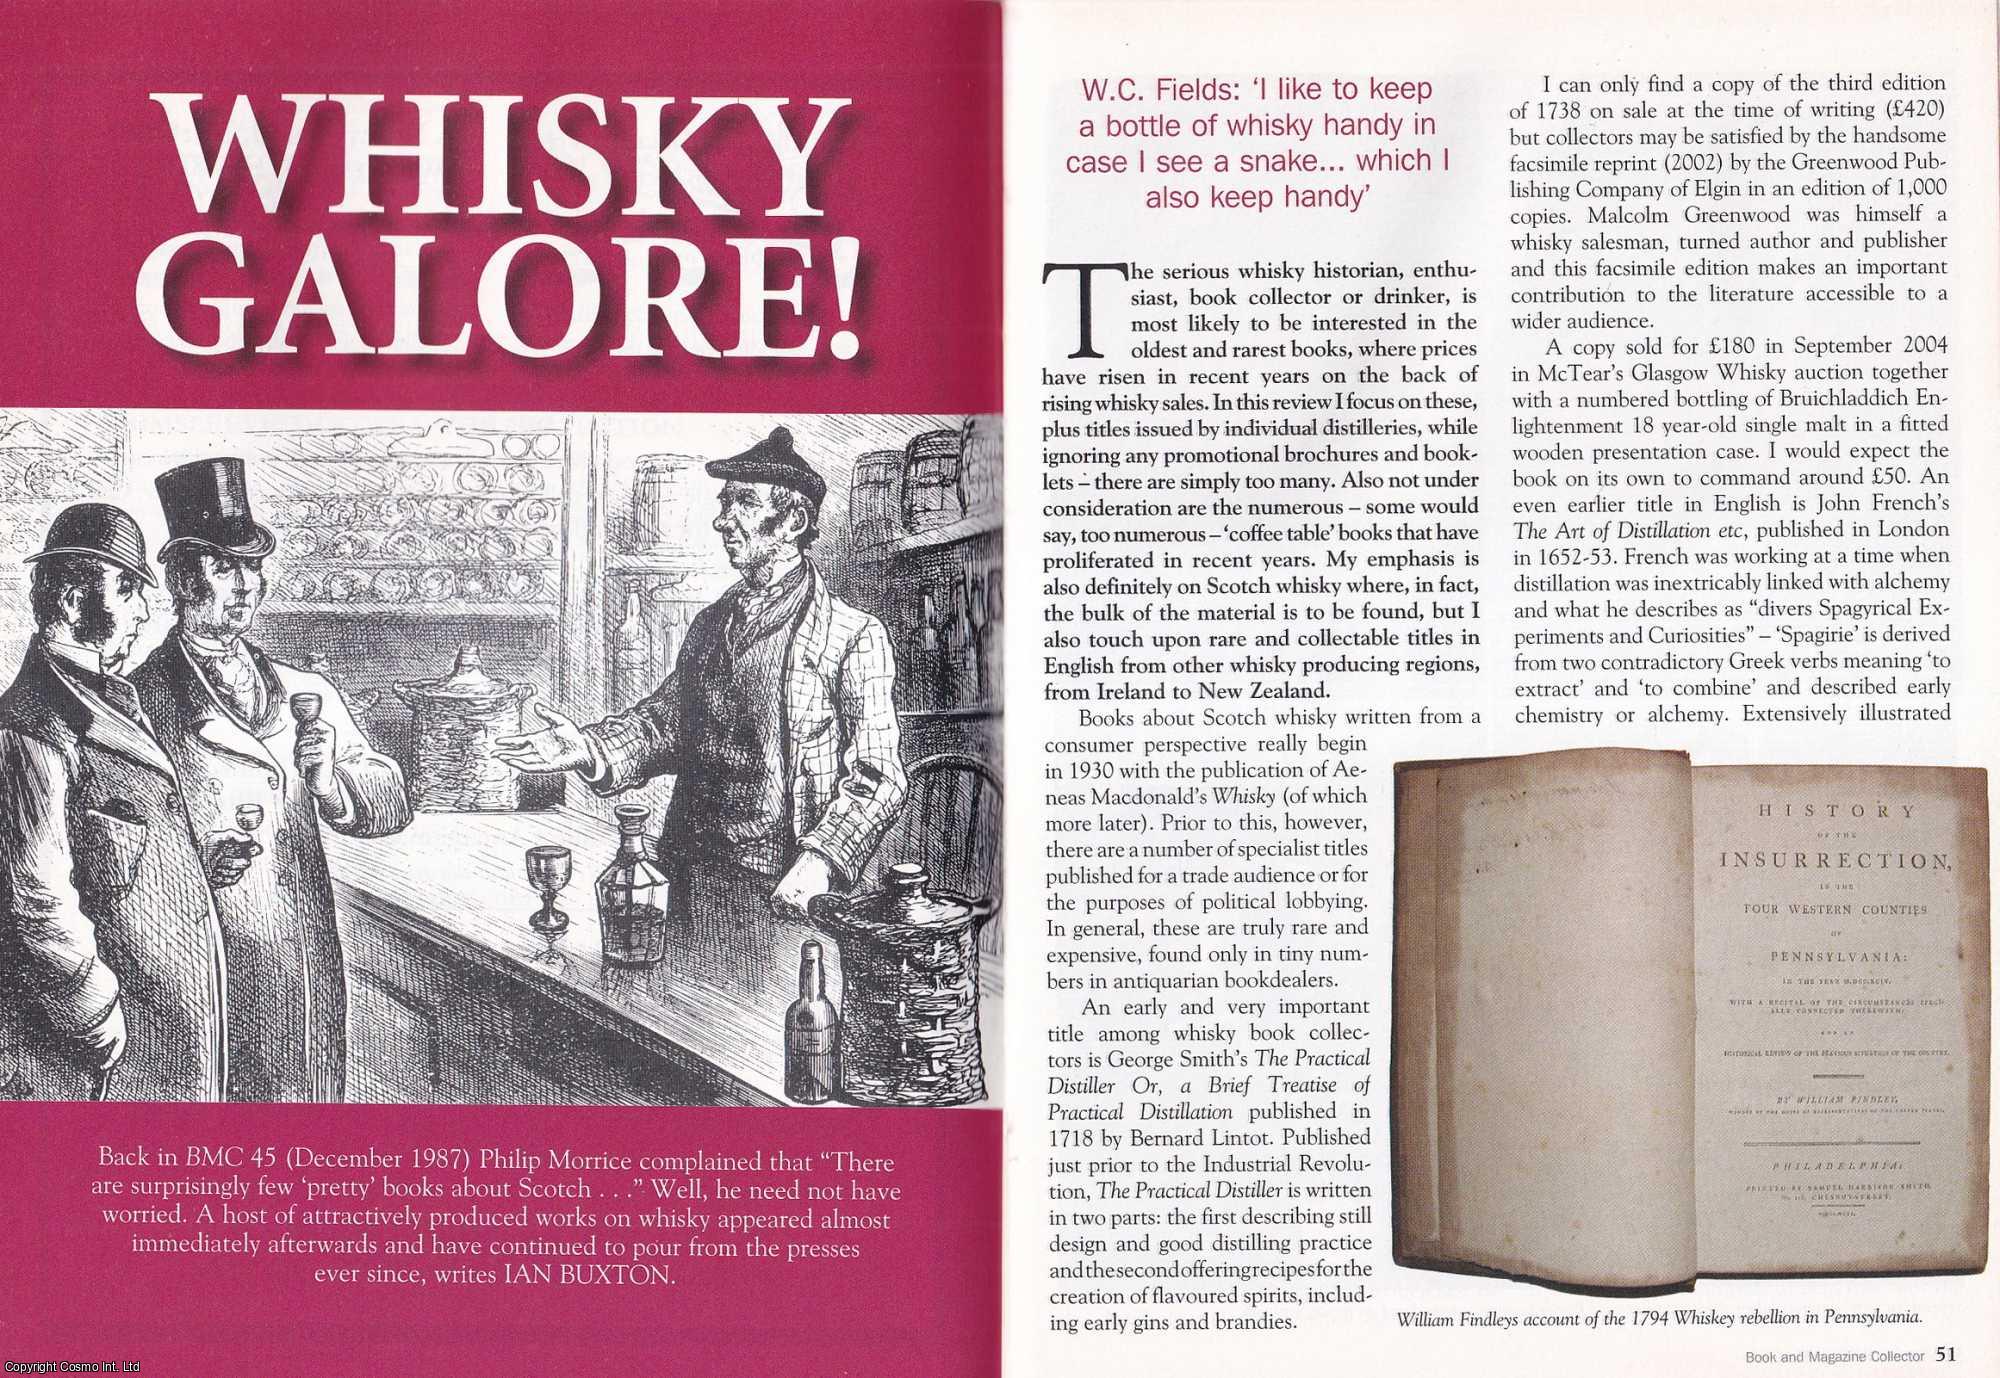 Ian Buxton - Whisky Galore! This is an original article separated from an issue of The Book & Magazine Collector publication.